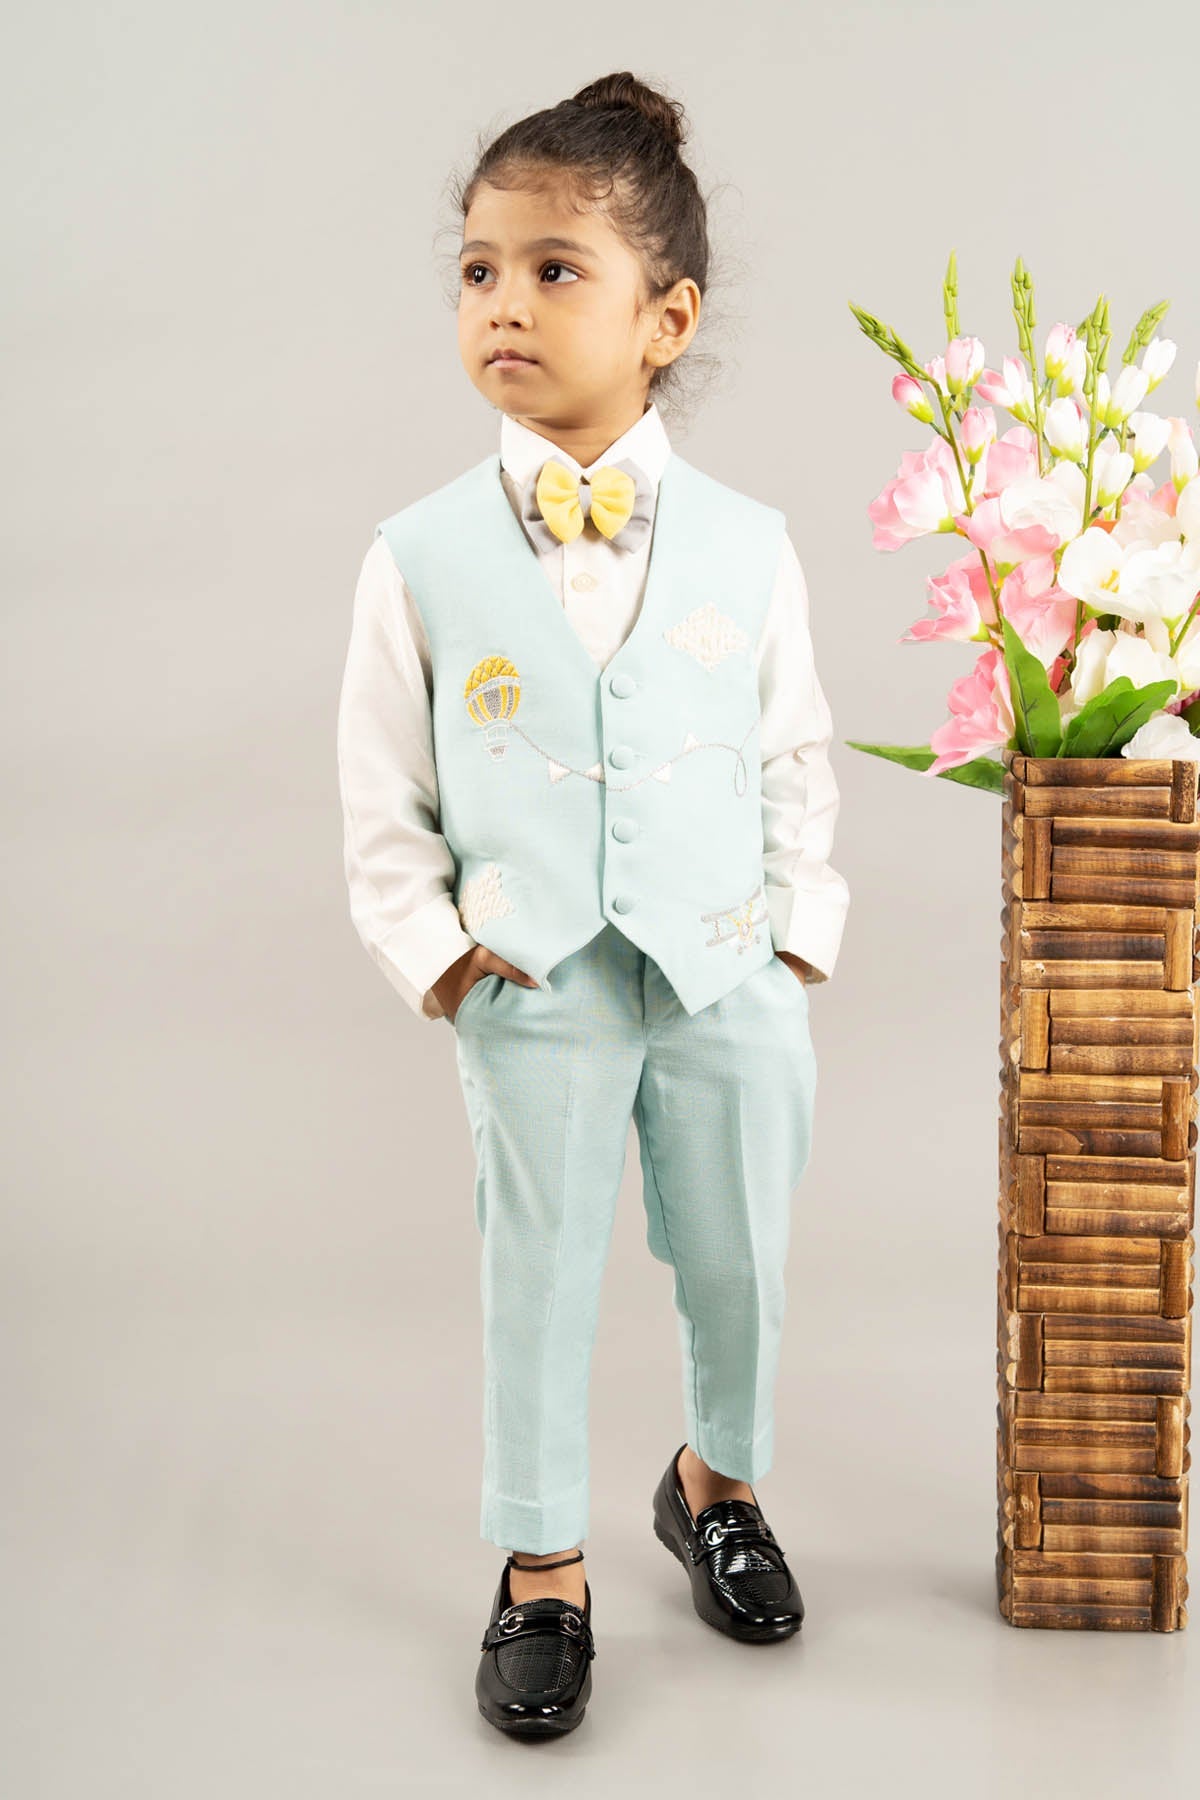 Designer Little Brats Airplane Embroidered Suit For Kids Available online at ScrollnShops